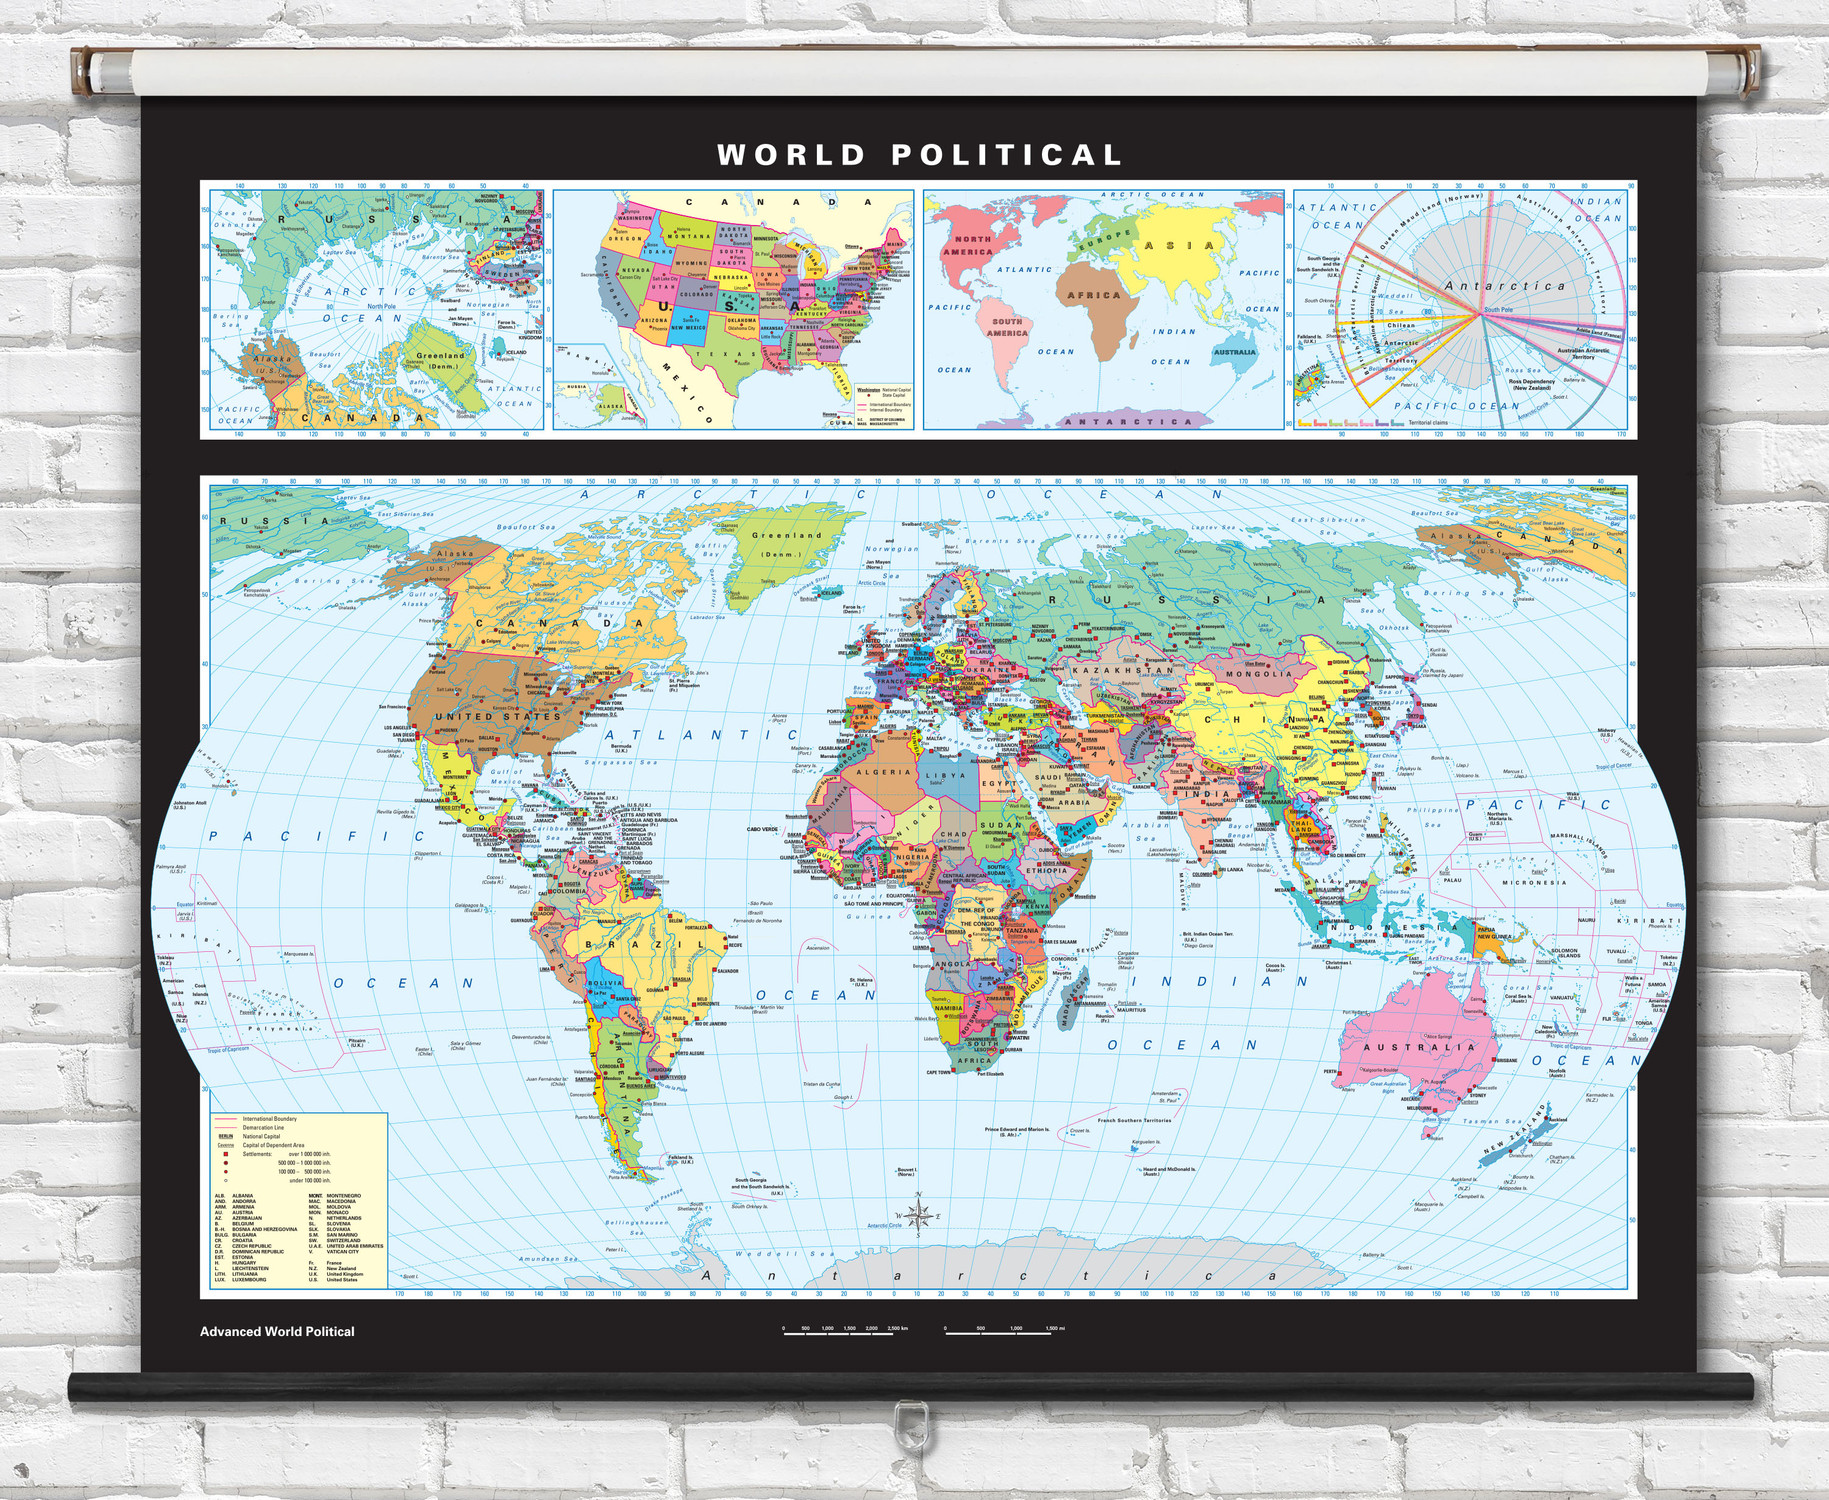 Advanced World Political Map on Spring Roller from Klett-Perthes